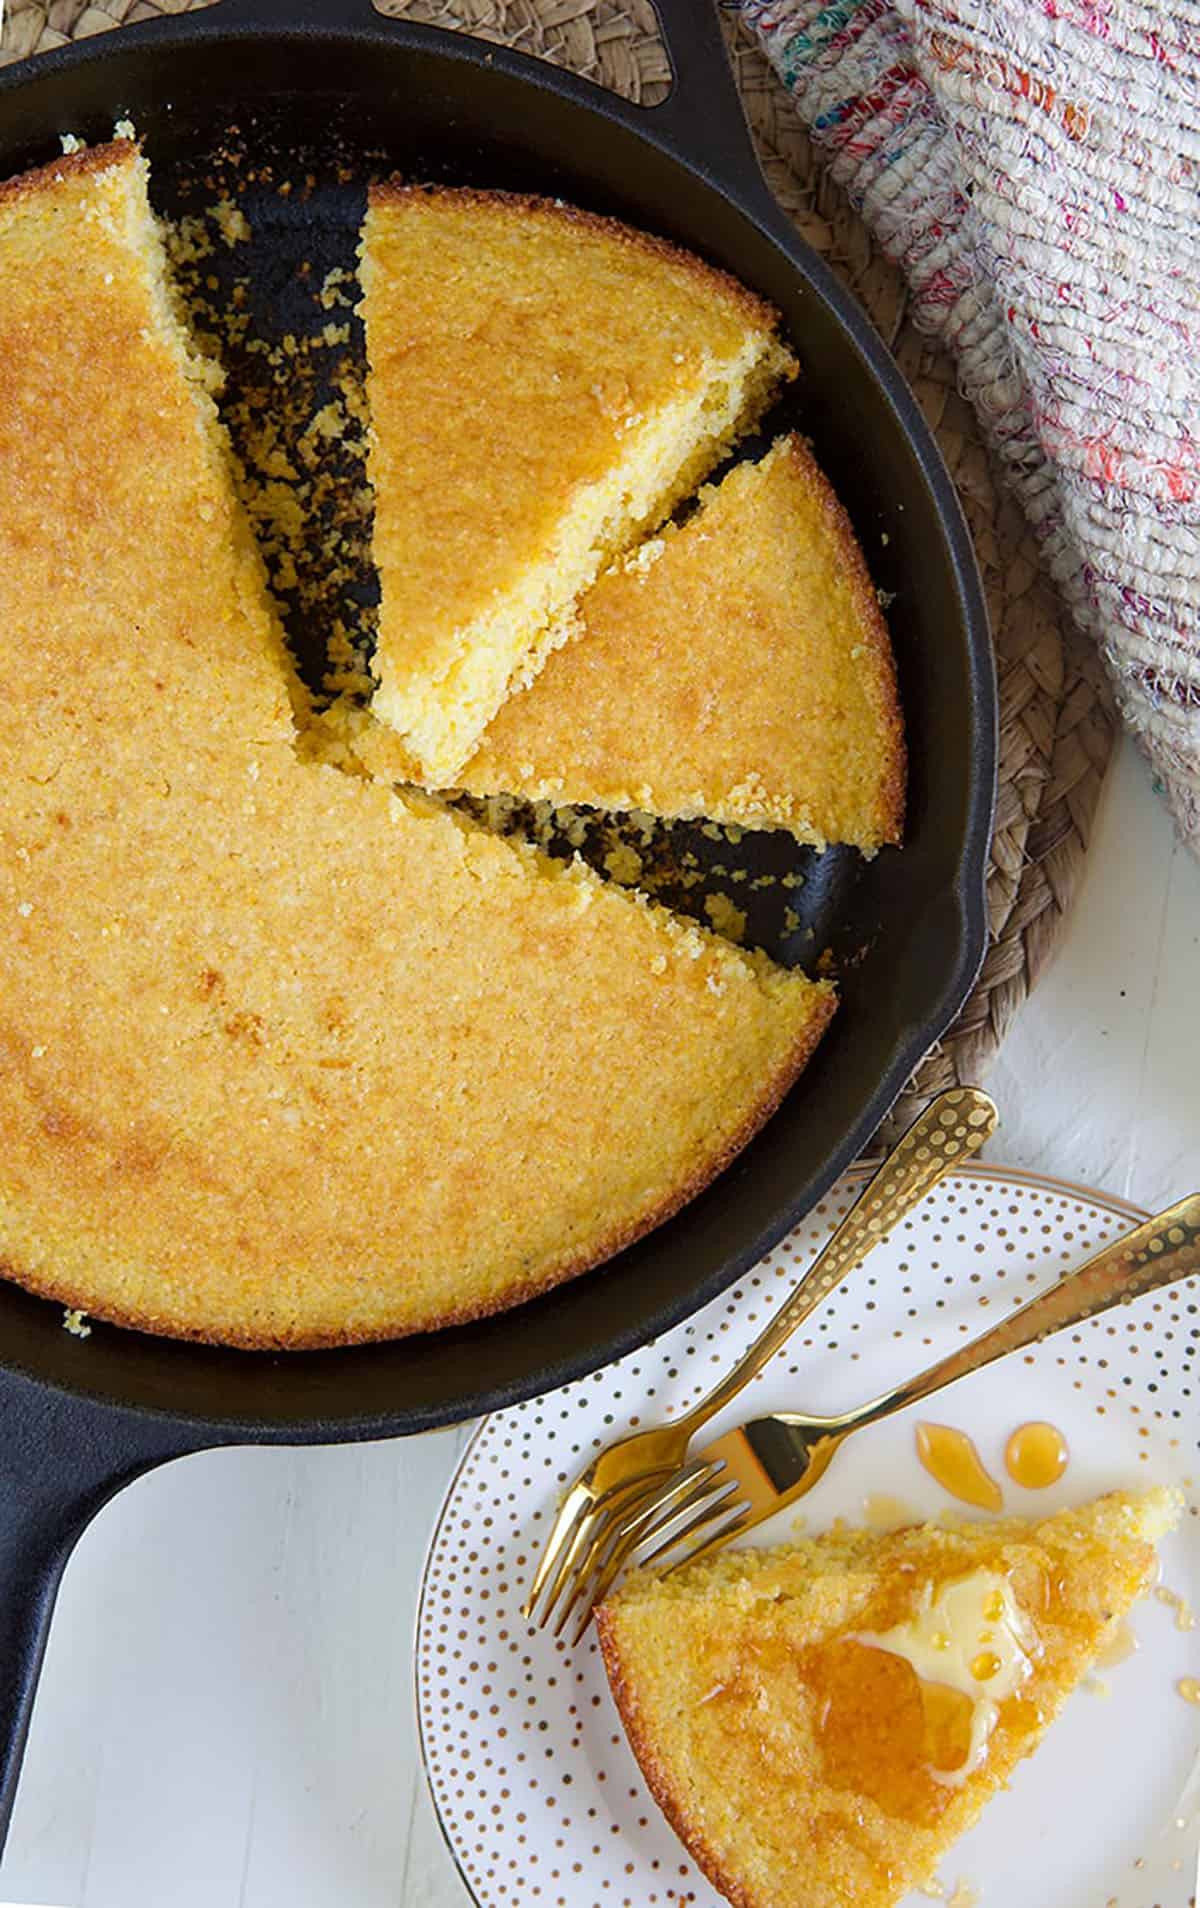 Two slices of cornbread are in a skillet, next to the uncut cornbread.